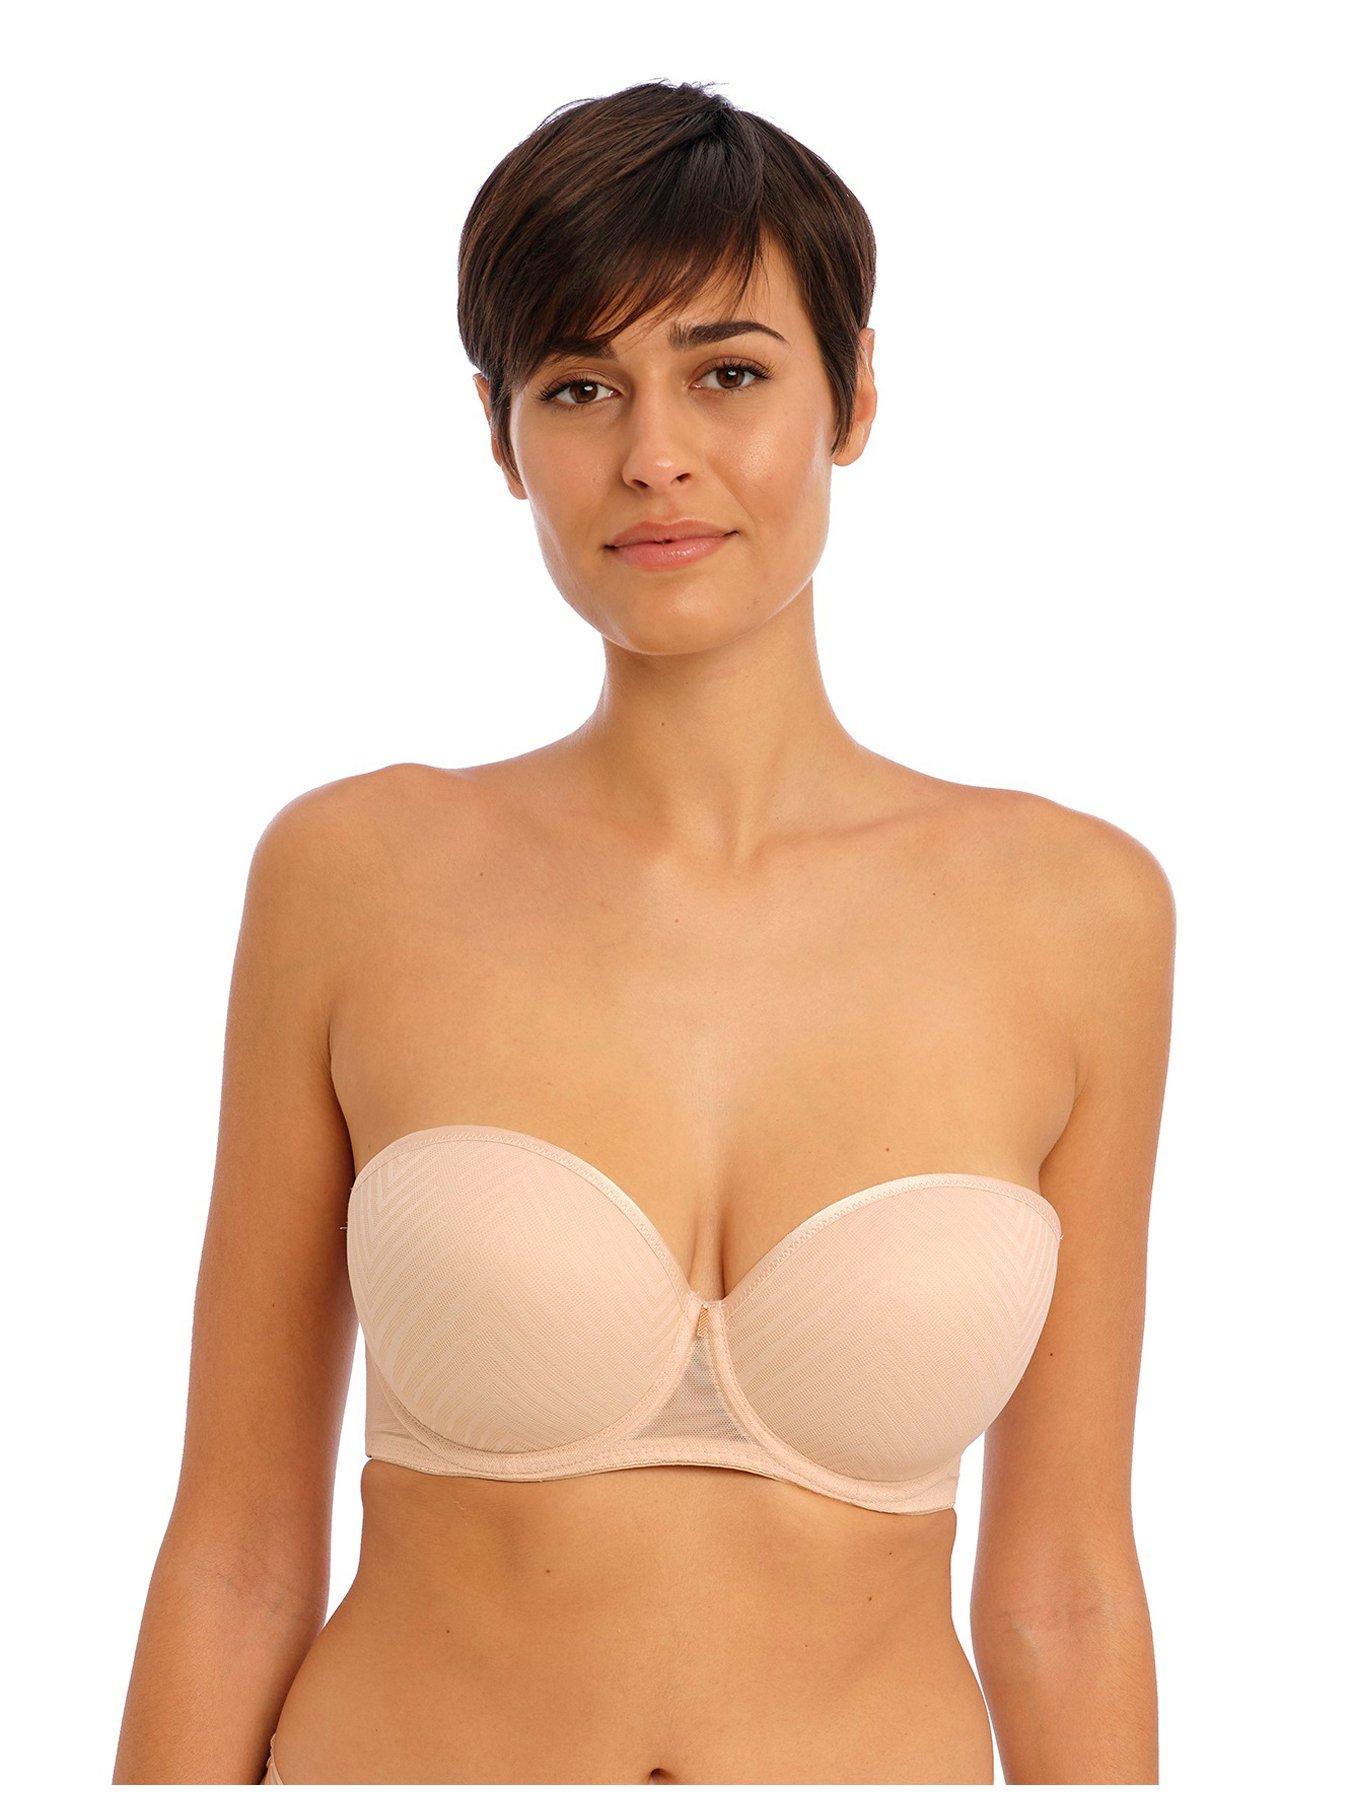 Elomi Smooth Moulded Strapless Seamless Underwire T-Shirt Bra - Black